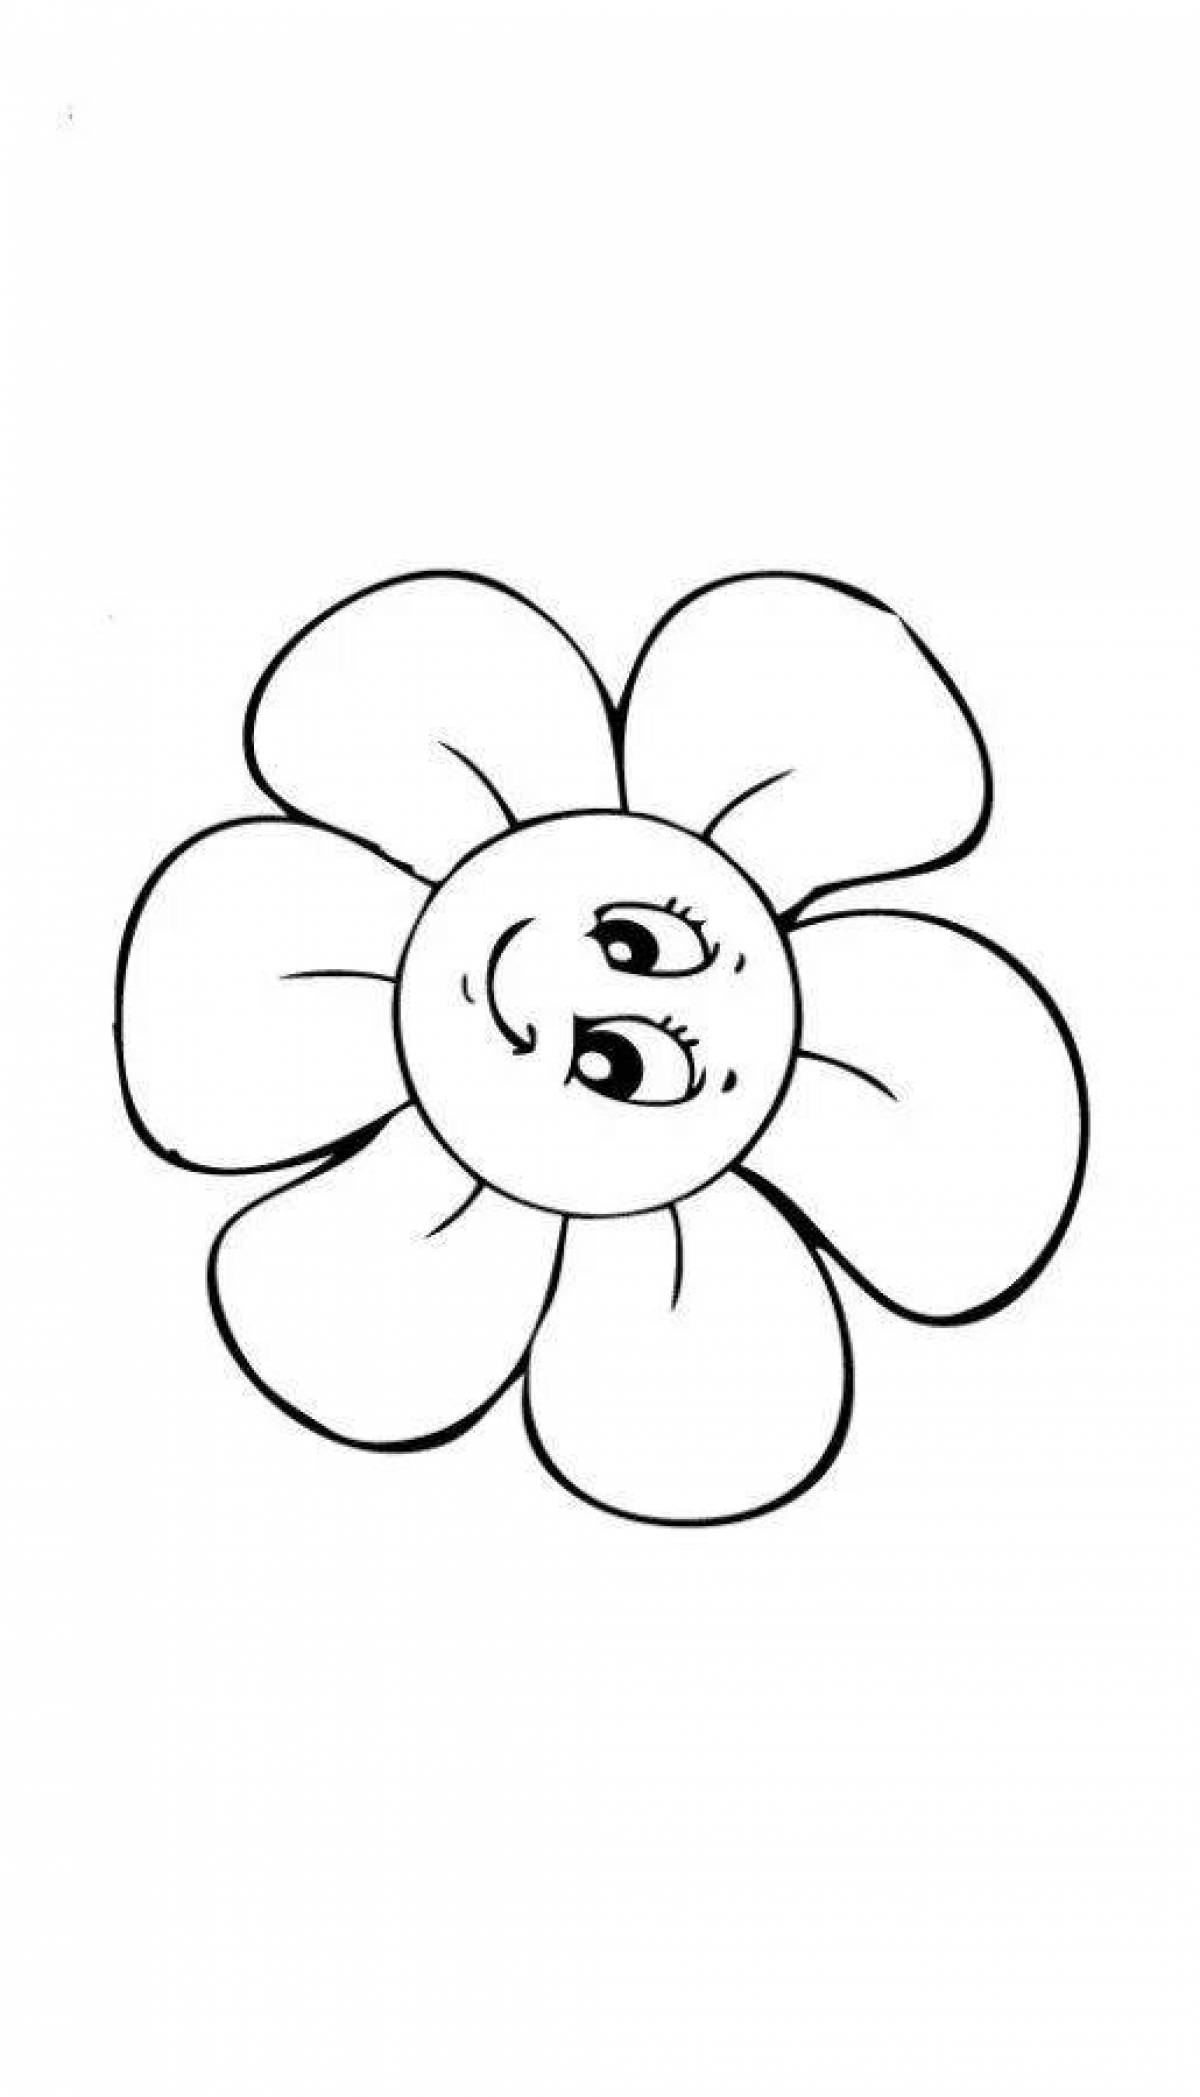 Joyful coloring flower template with seven colors